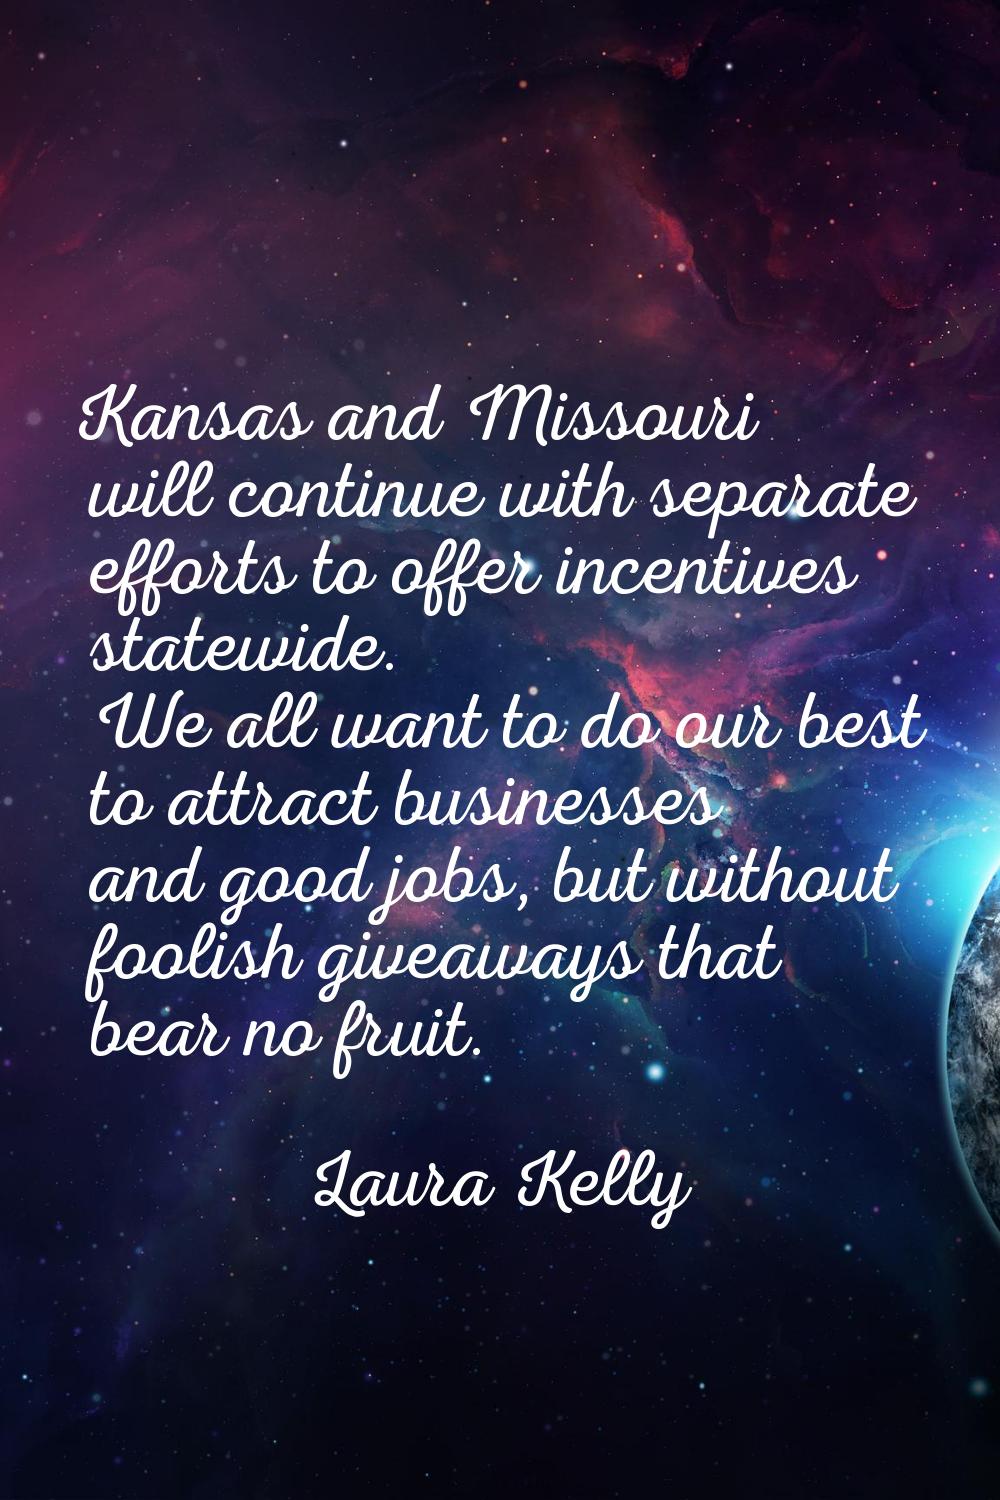 Kansas and Missouri will continue with separate efforts to offer incentives statewide. We all want 